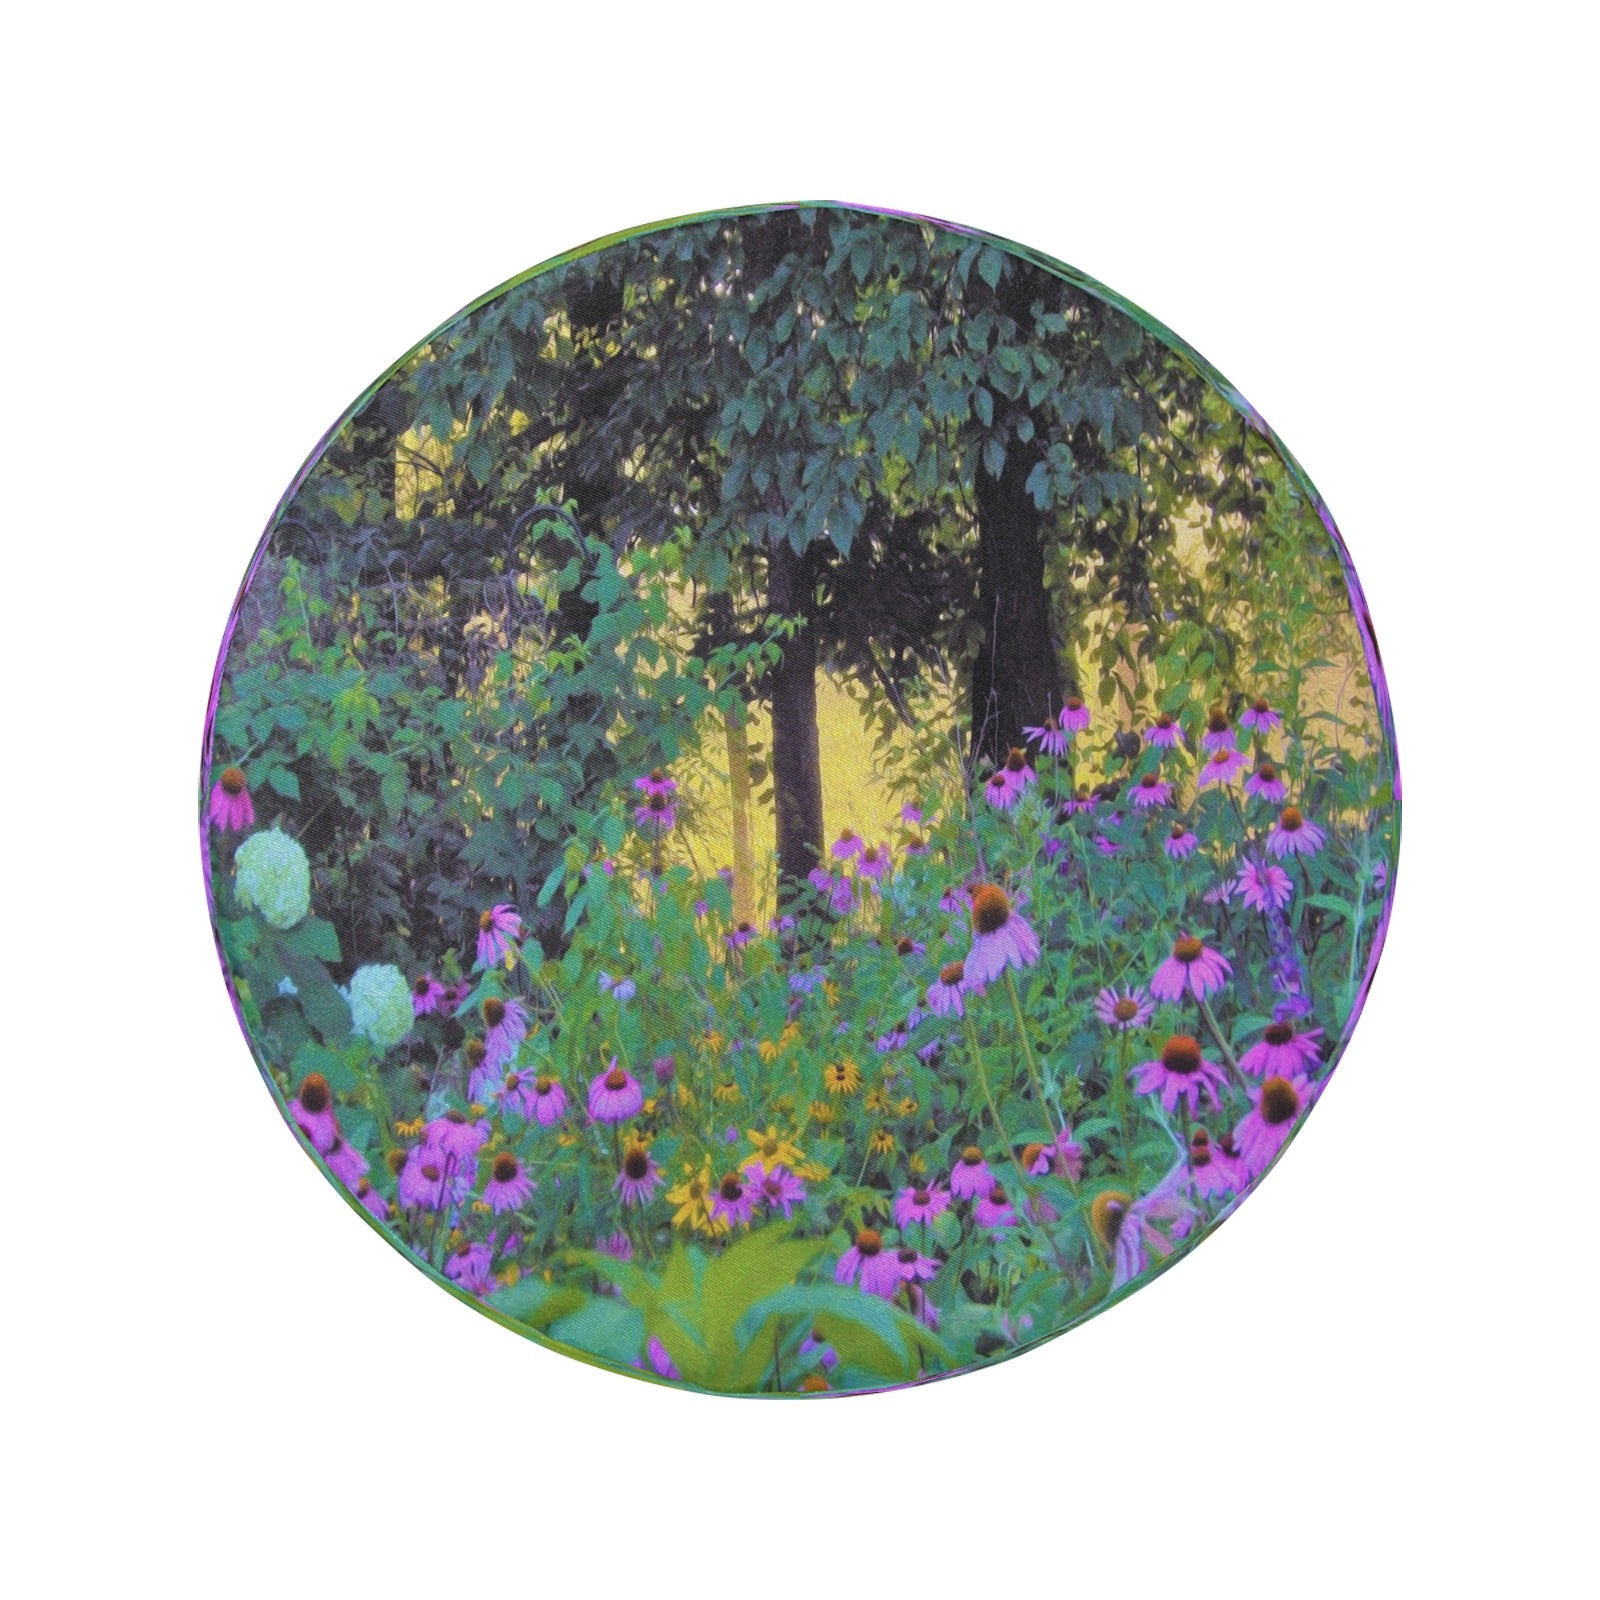 Spare Tire Covers, Hazy Morning Sunrise in My Rubio Garden - Large